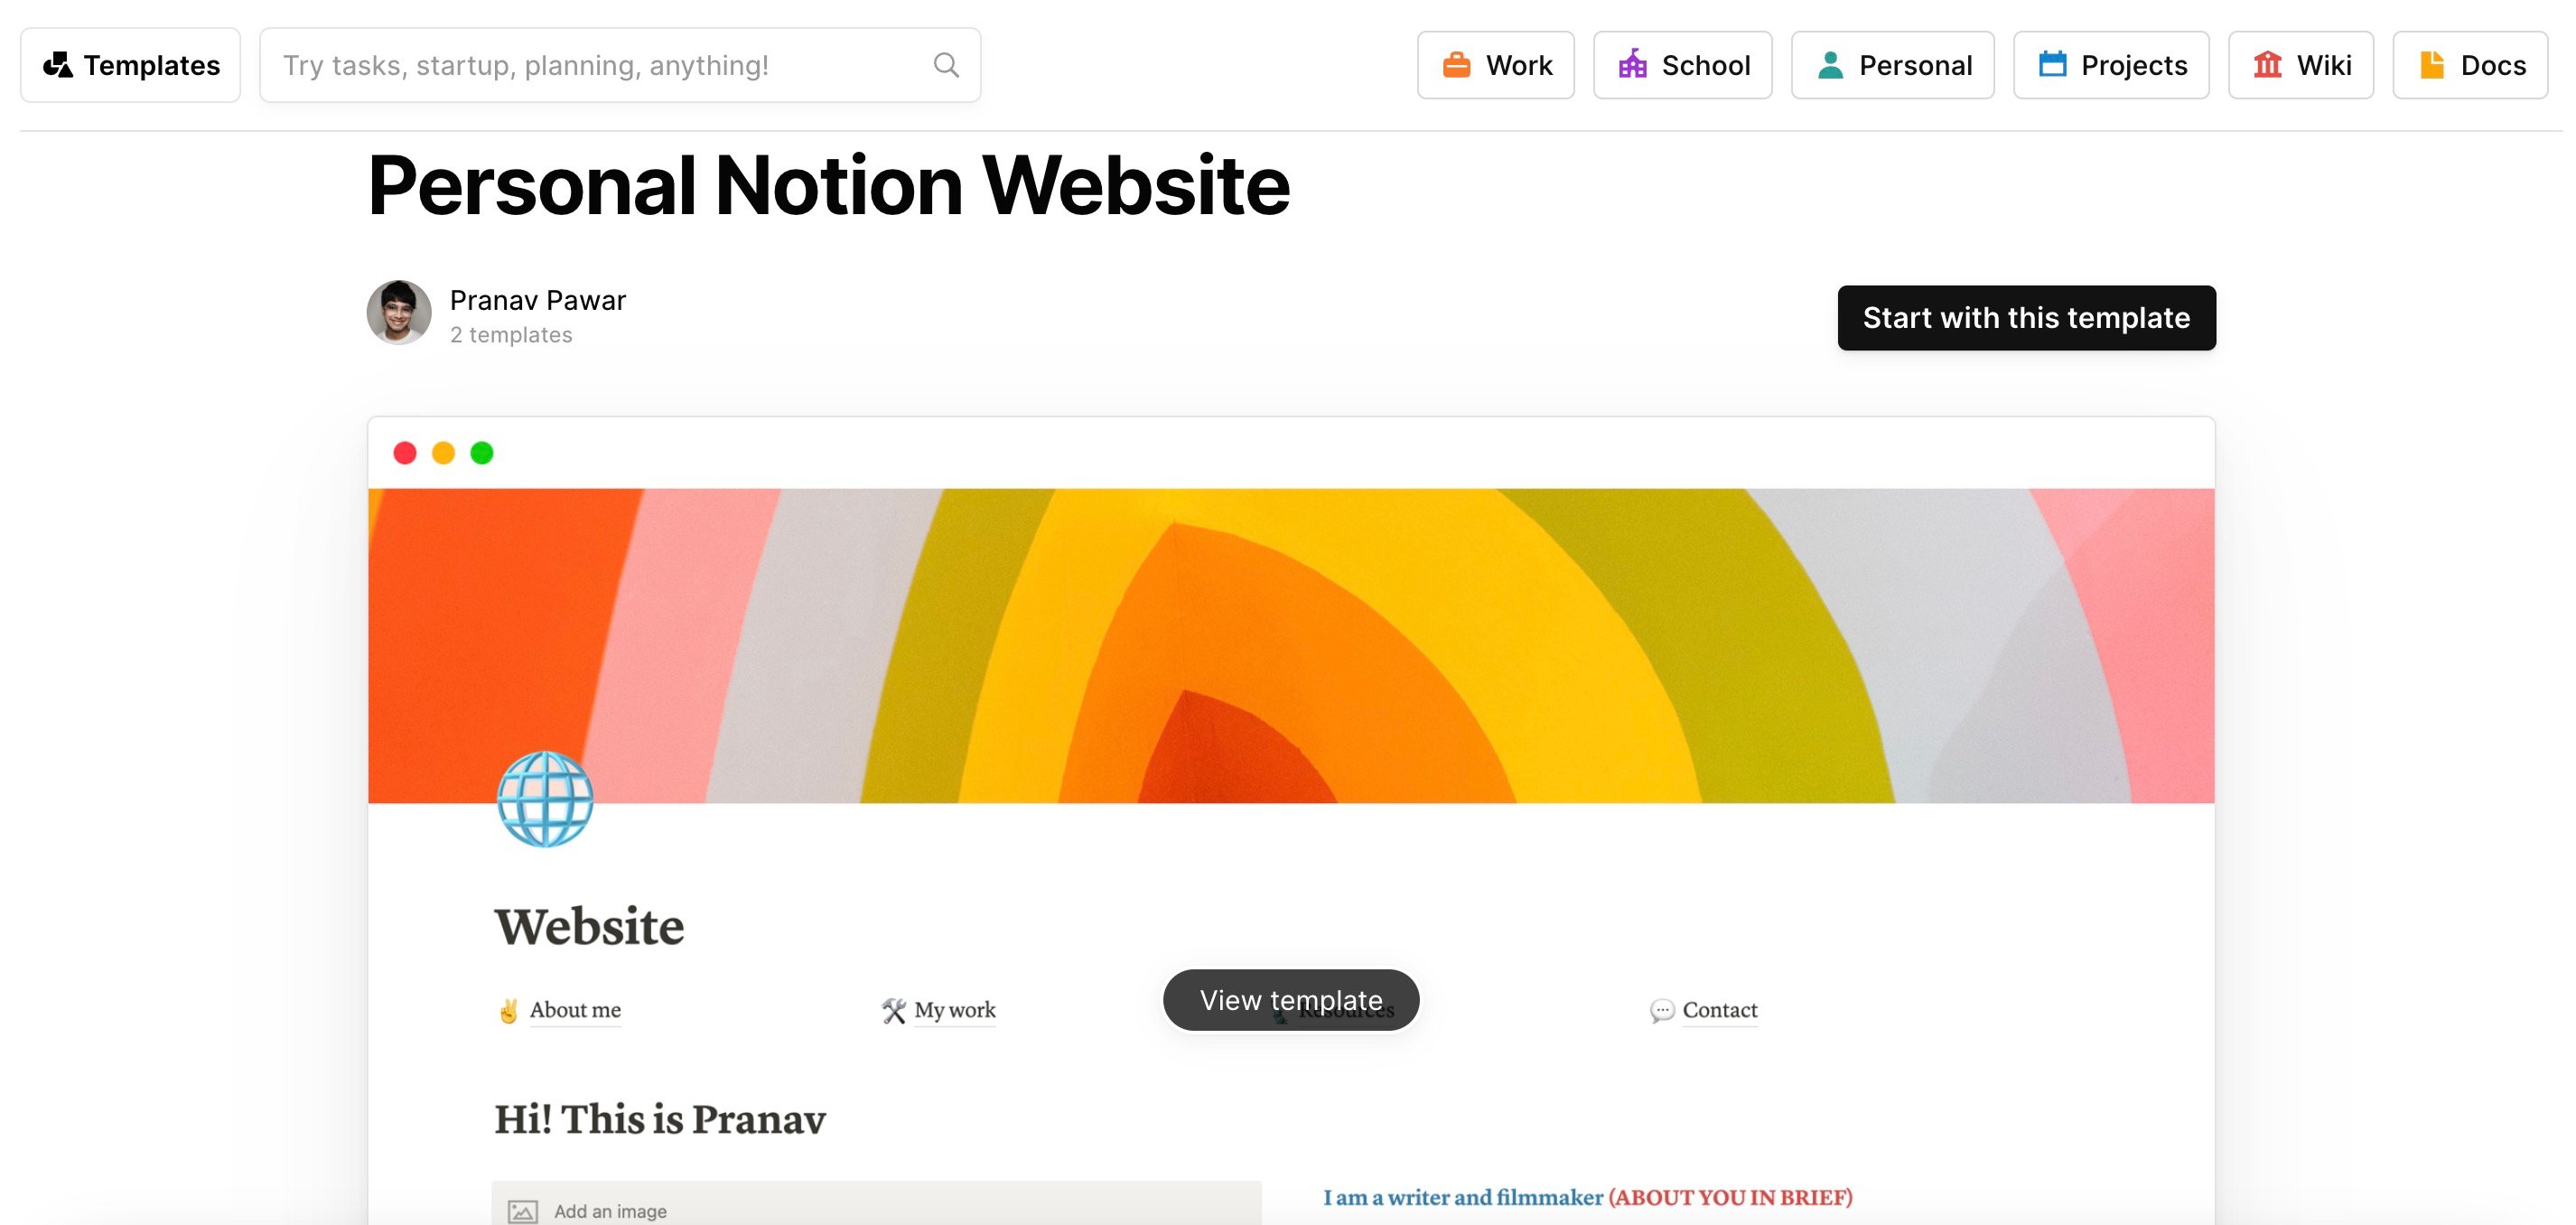 Personal Notion Website